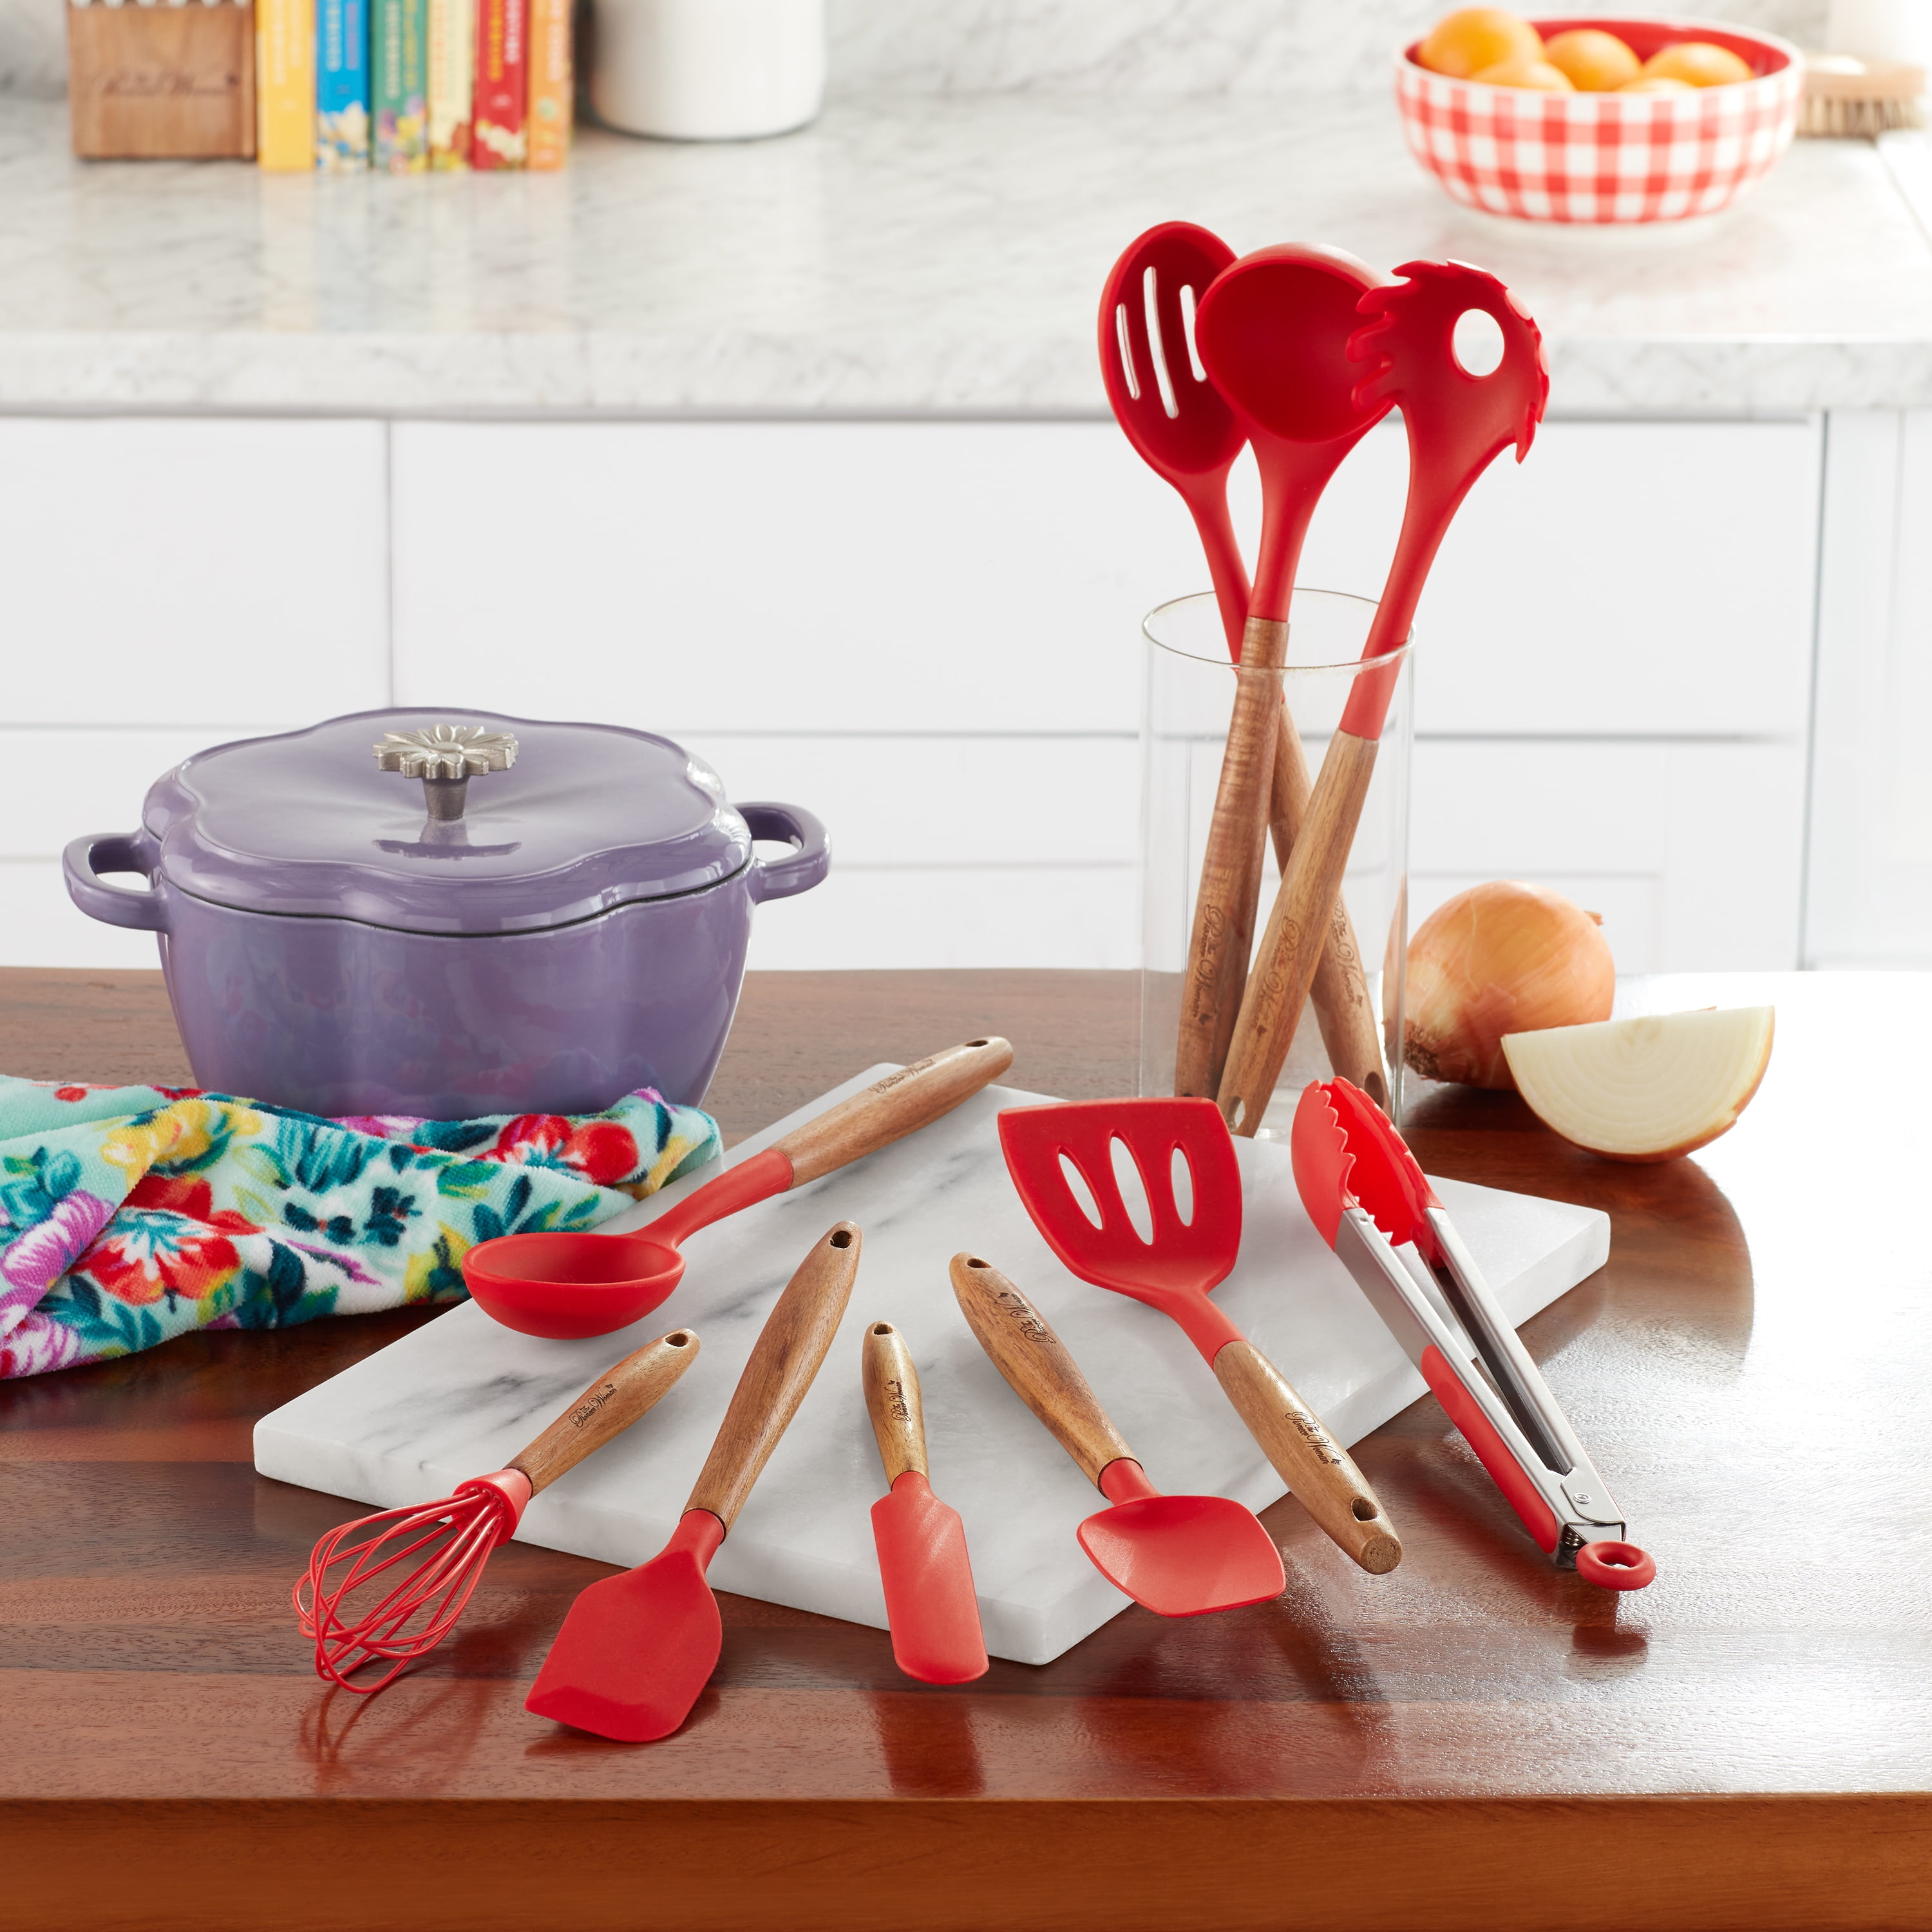 KitchenAid Cooks 6-piece Culinary Utensil Set (Red - Pack of 6)